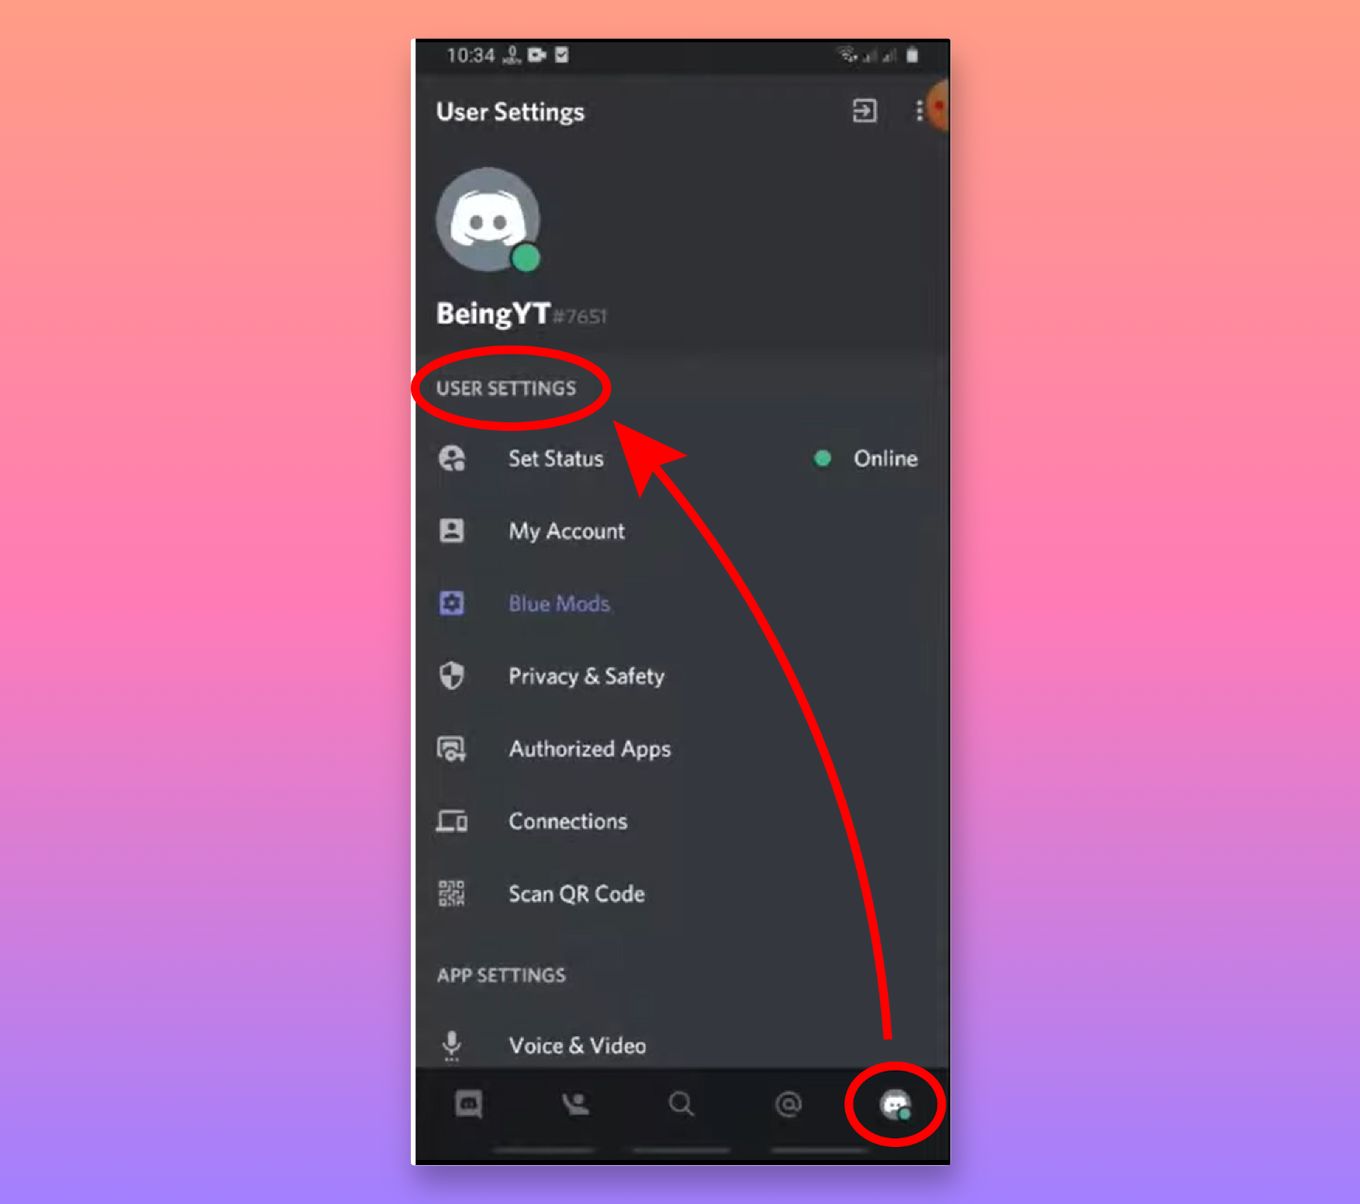 How to See Deleted Messages on Discord - Plugin [✓ Solved